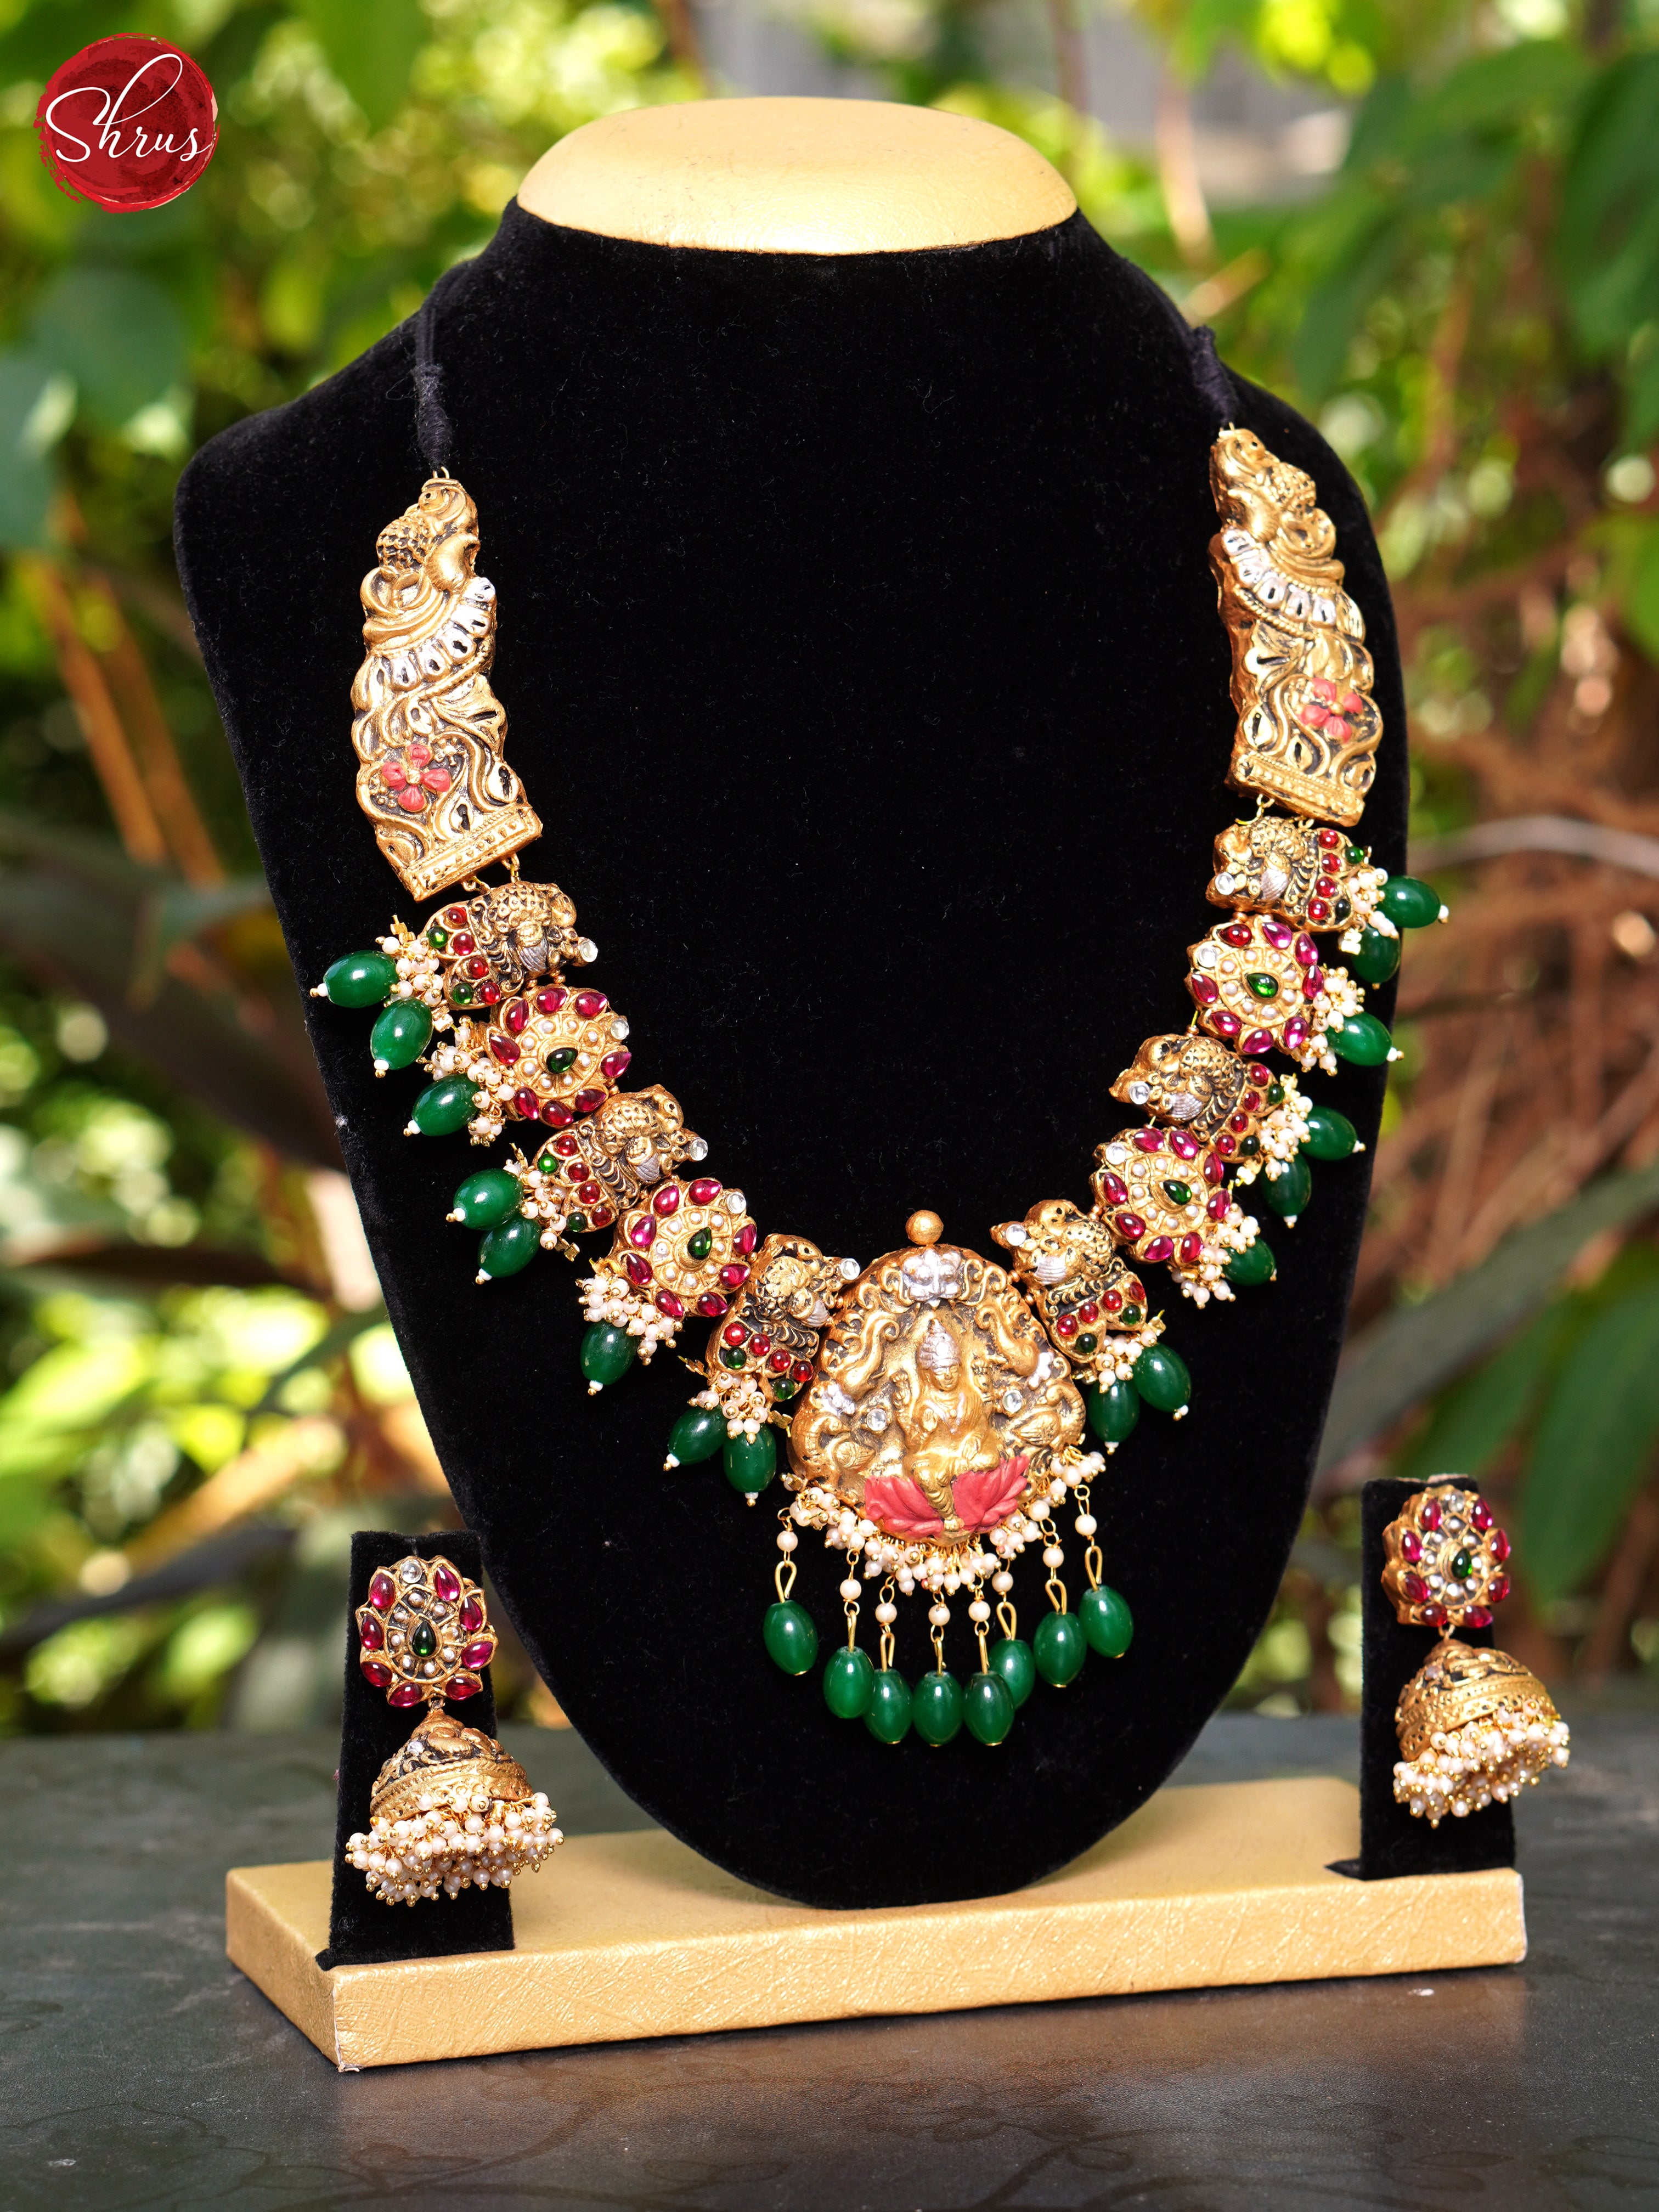 Traditional handmade terracotta necklace with jhumka  - Accessories - Shop on ShrusEternity.com